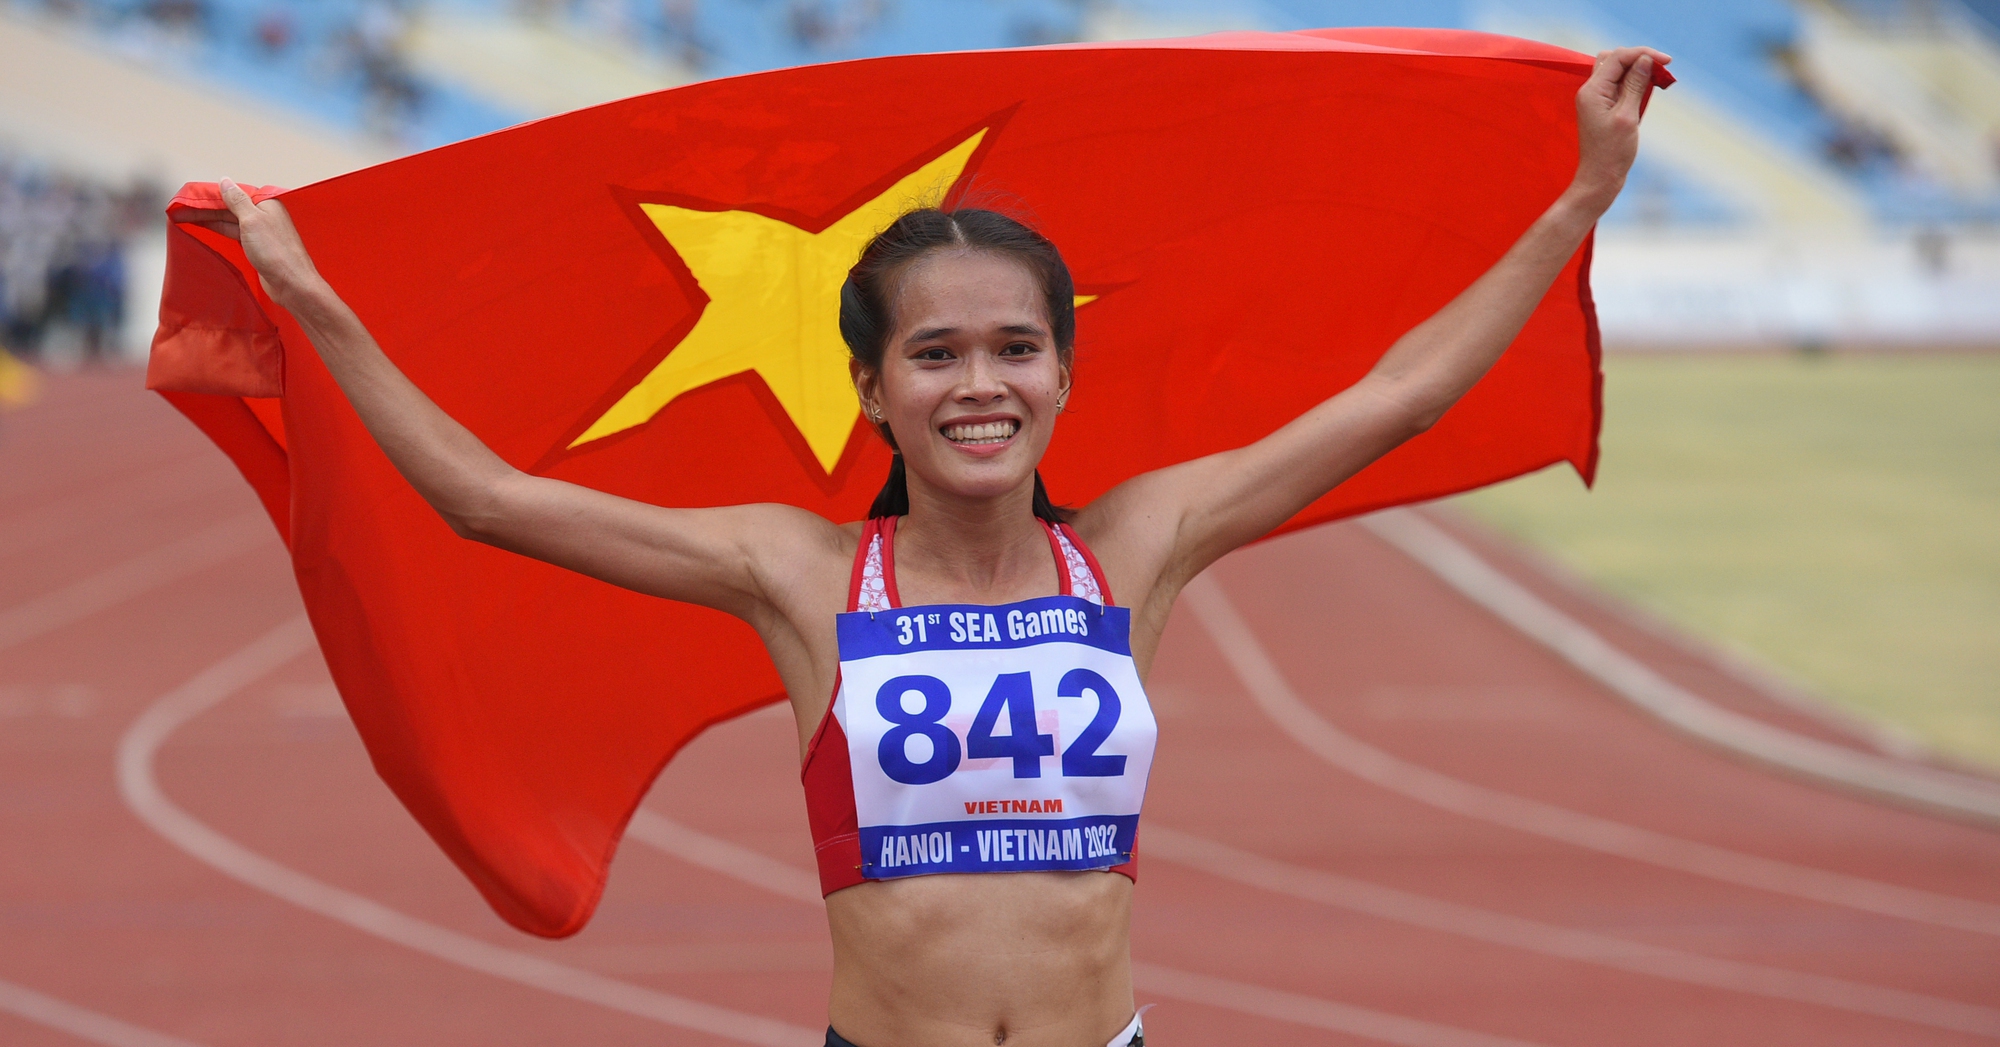 Coach made a reasonable move, Pham Thi Hong Le won the SEA Games gold medal for the first time